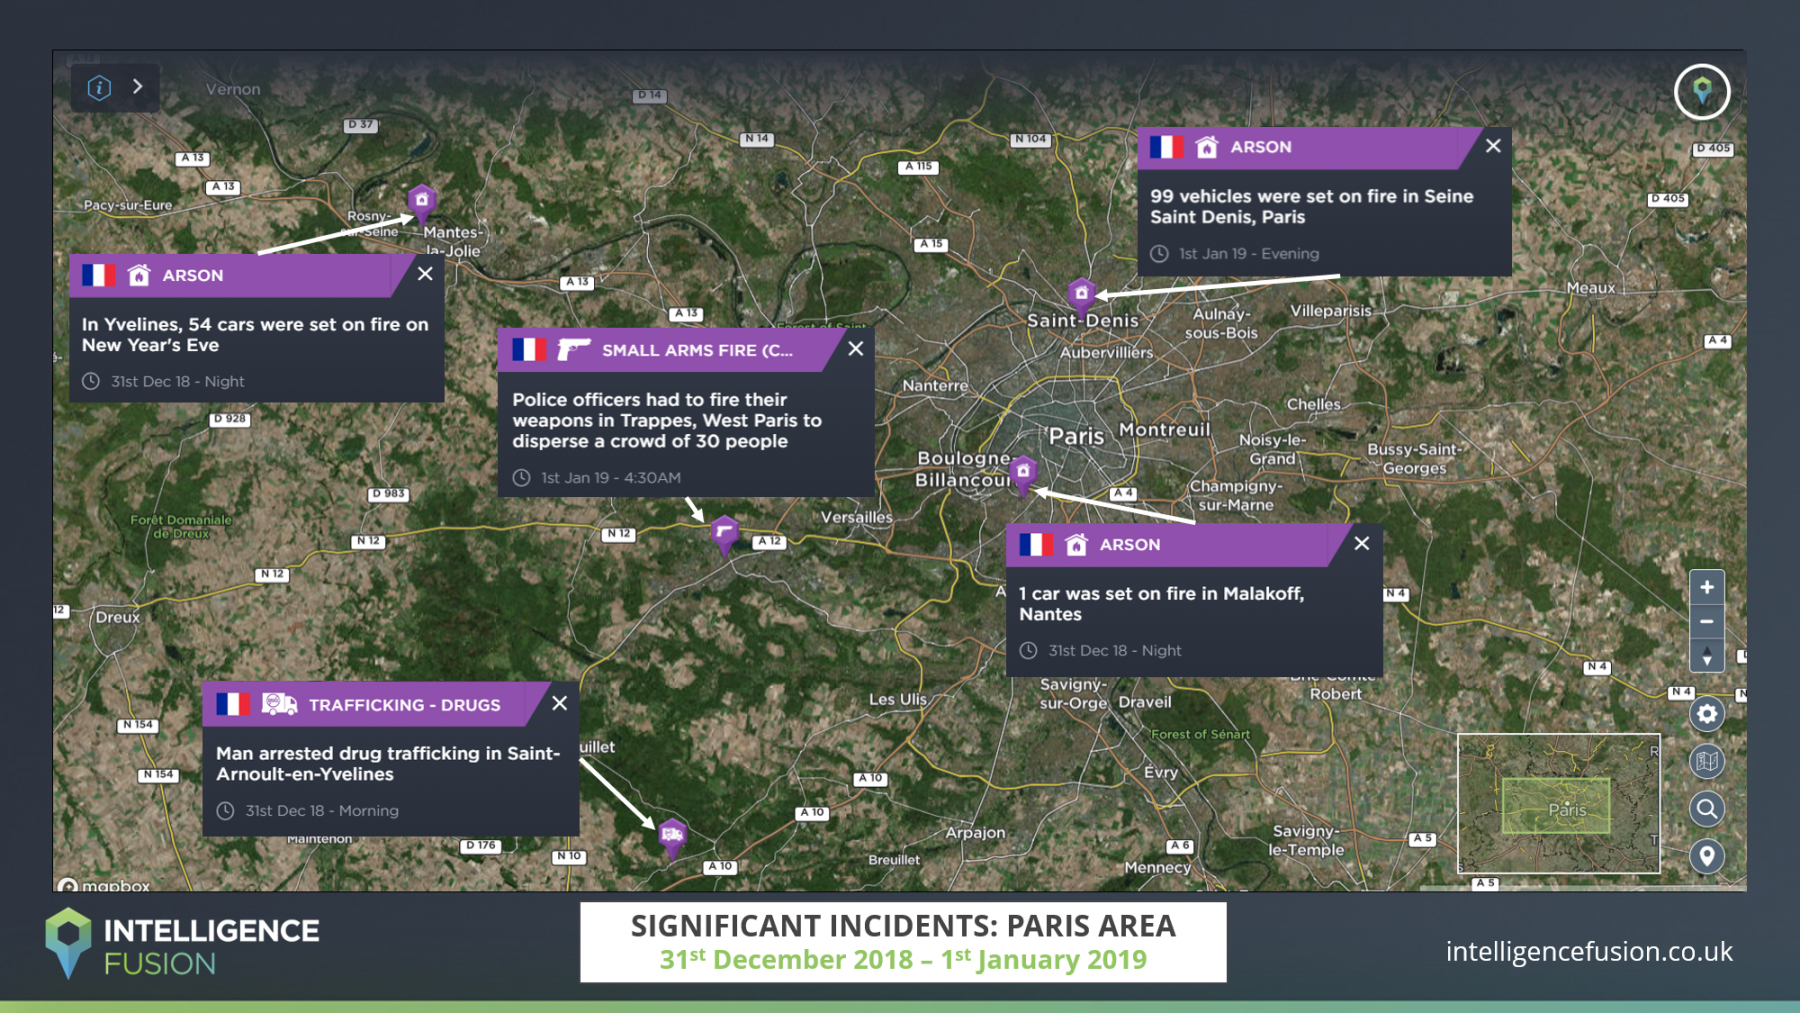 A closer look at the increased violence from youth gangs in Paris on New Year's Eve 2018/19